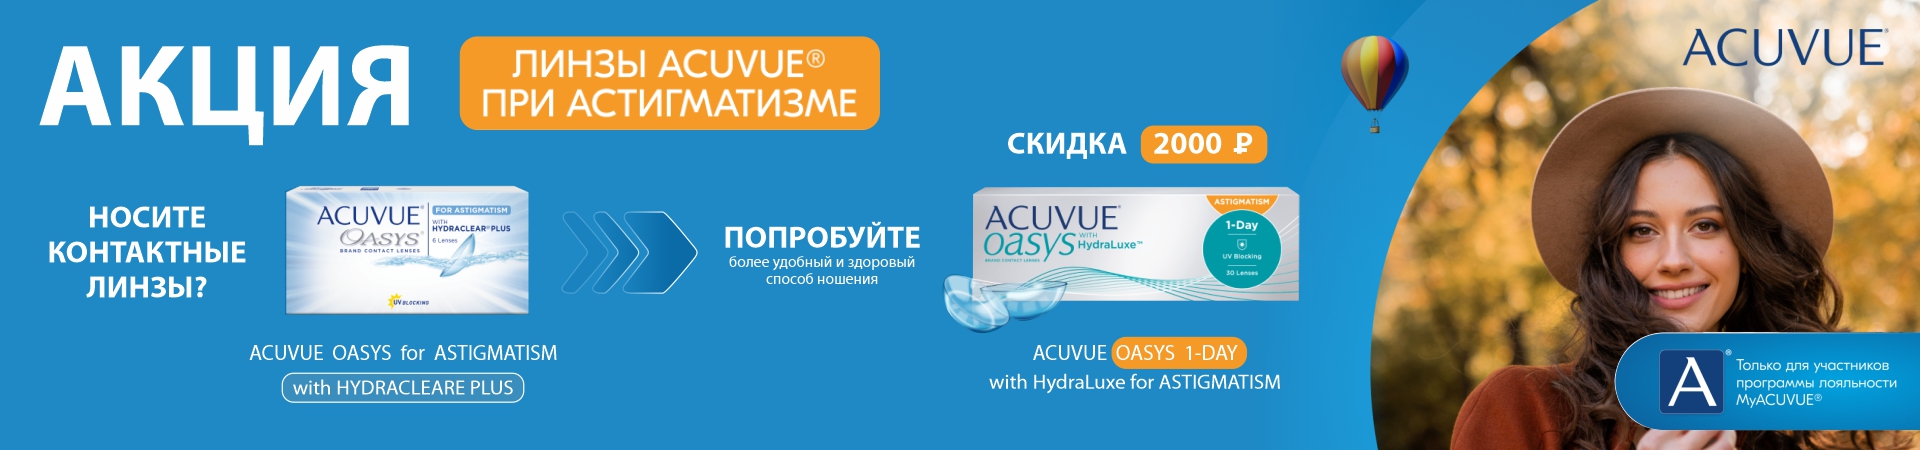 AcuVue_new2